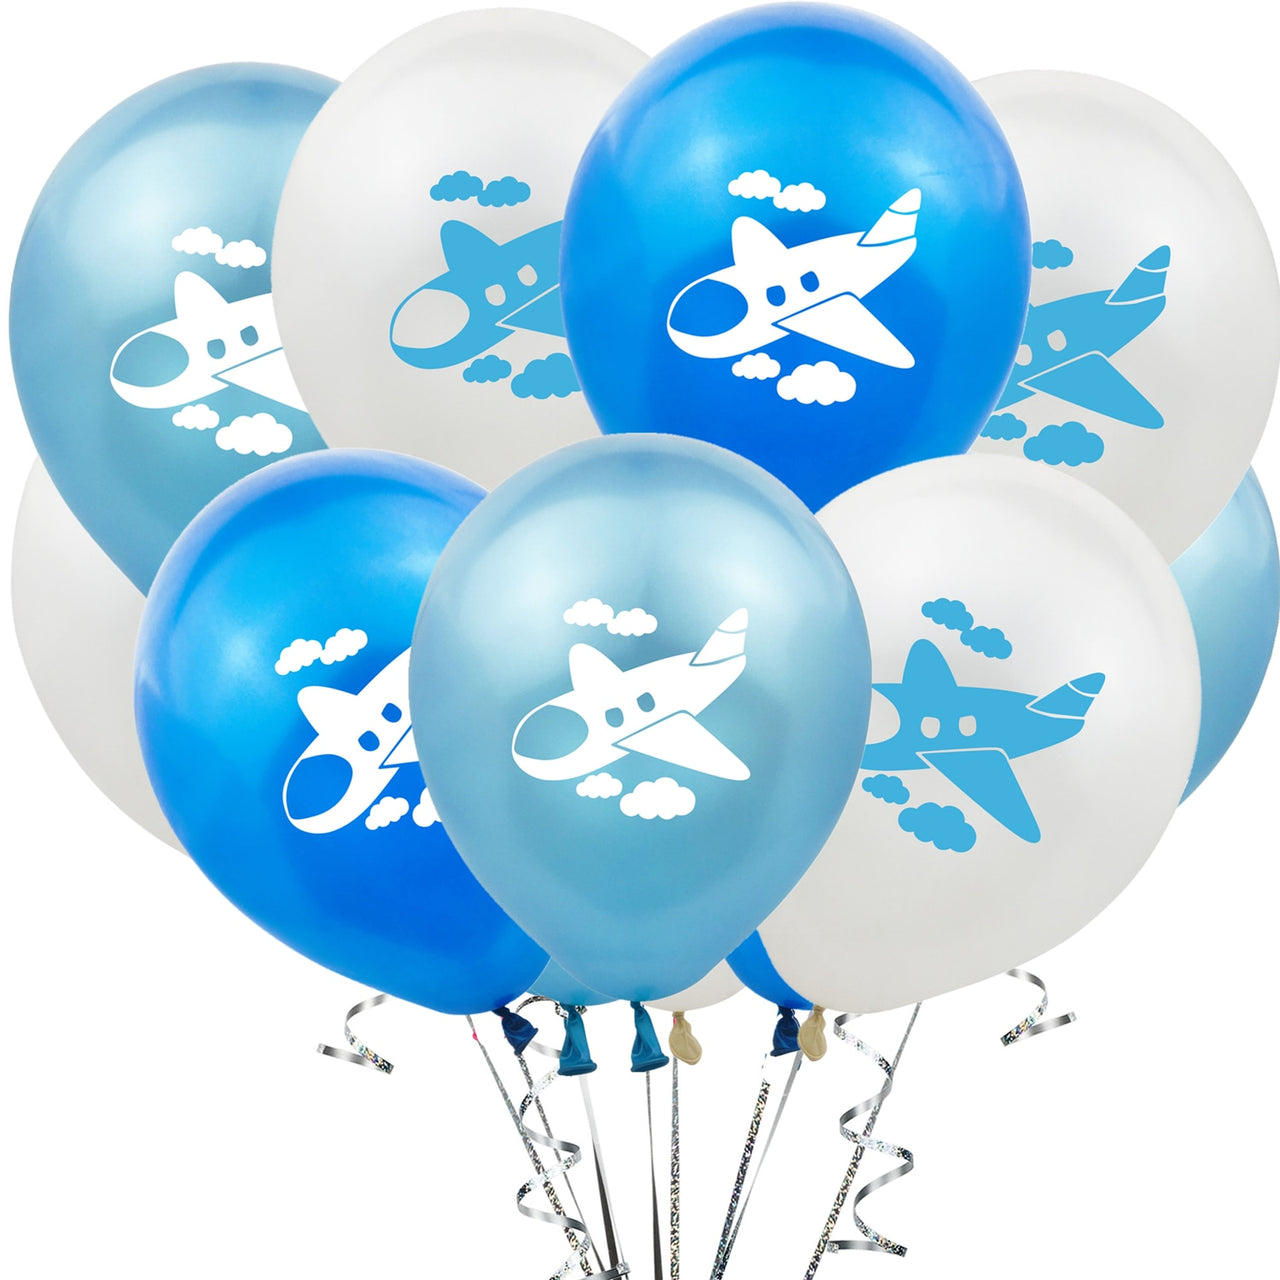 Best-Selling Airplane Balloons Sets